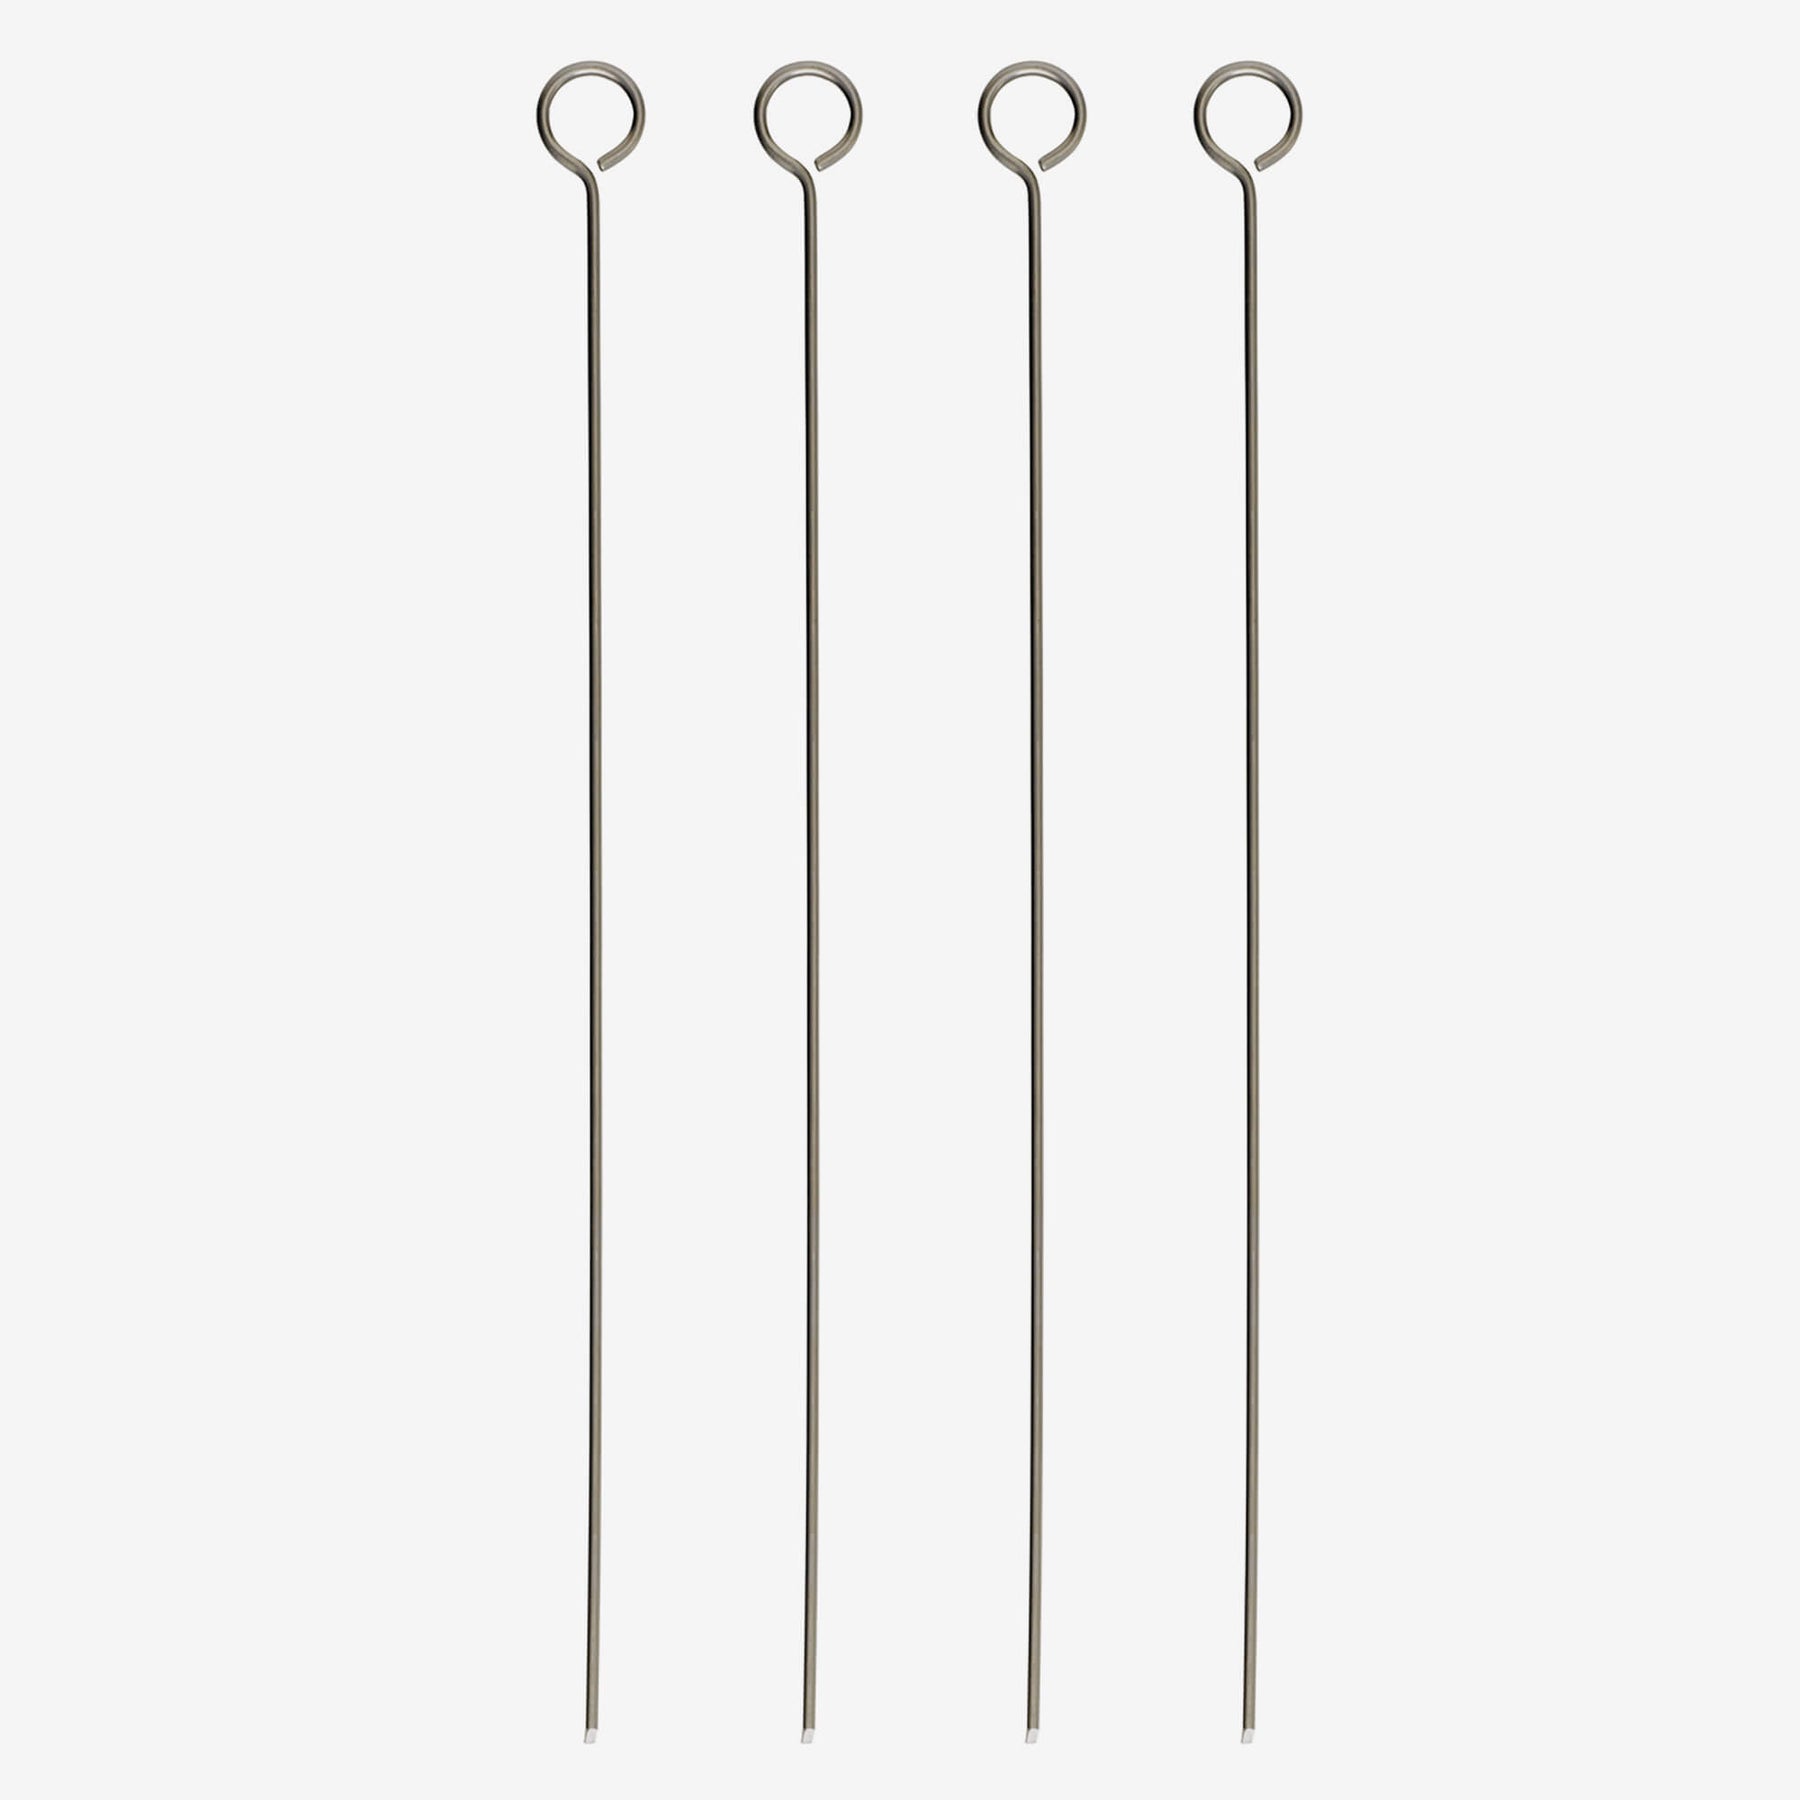 Stainless Steel Skewers, Set of 4, Available in 3 Sizes